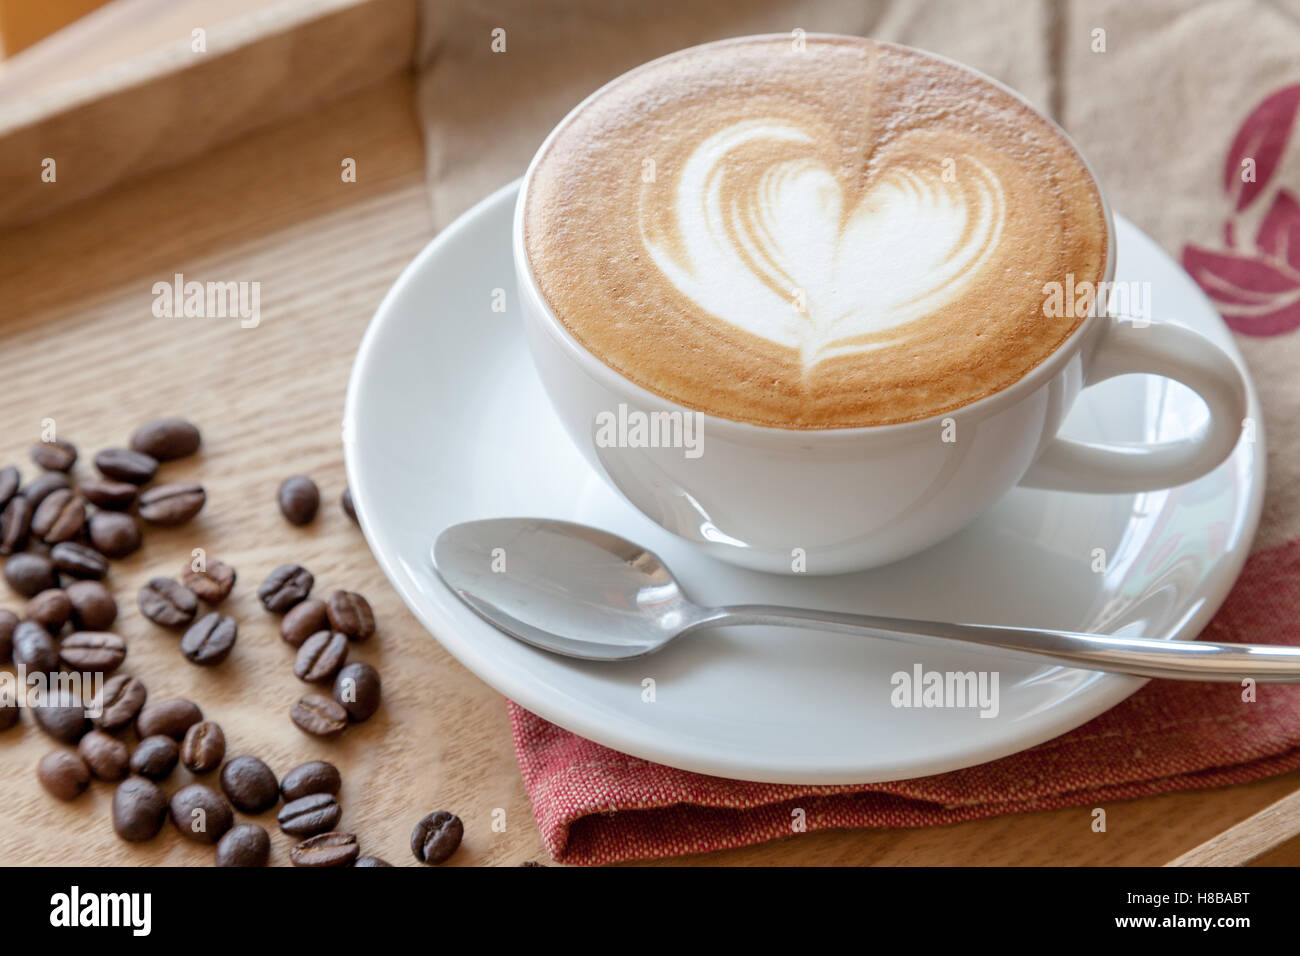 Coffee cup of Cafe' latte with heart latte art on top Stock Photo